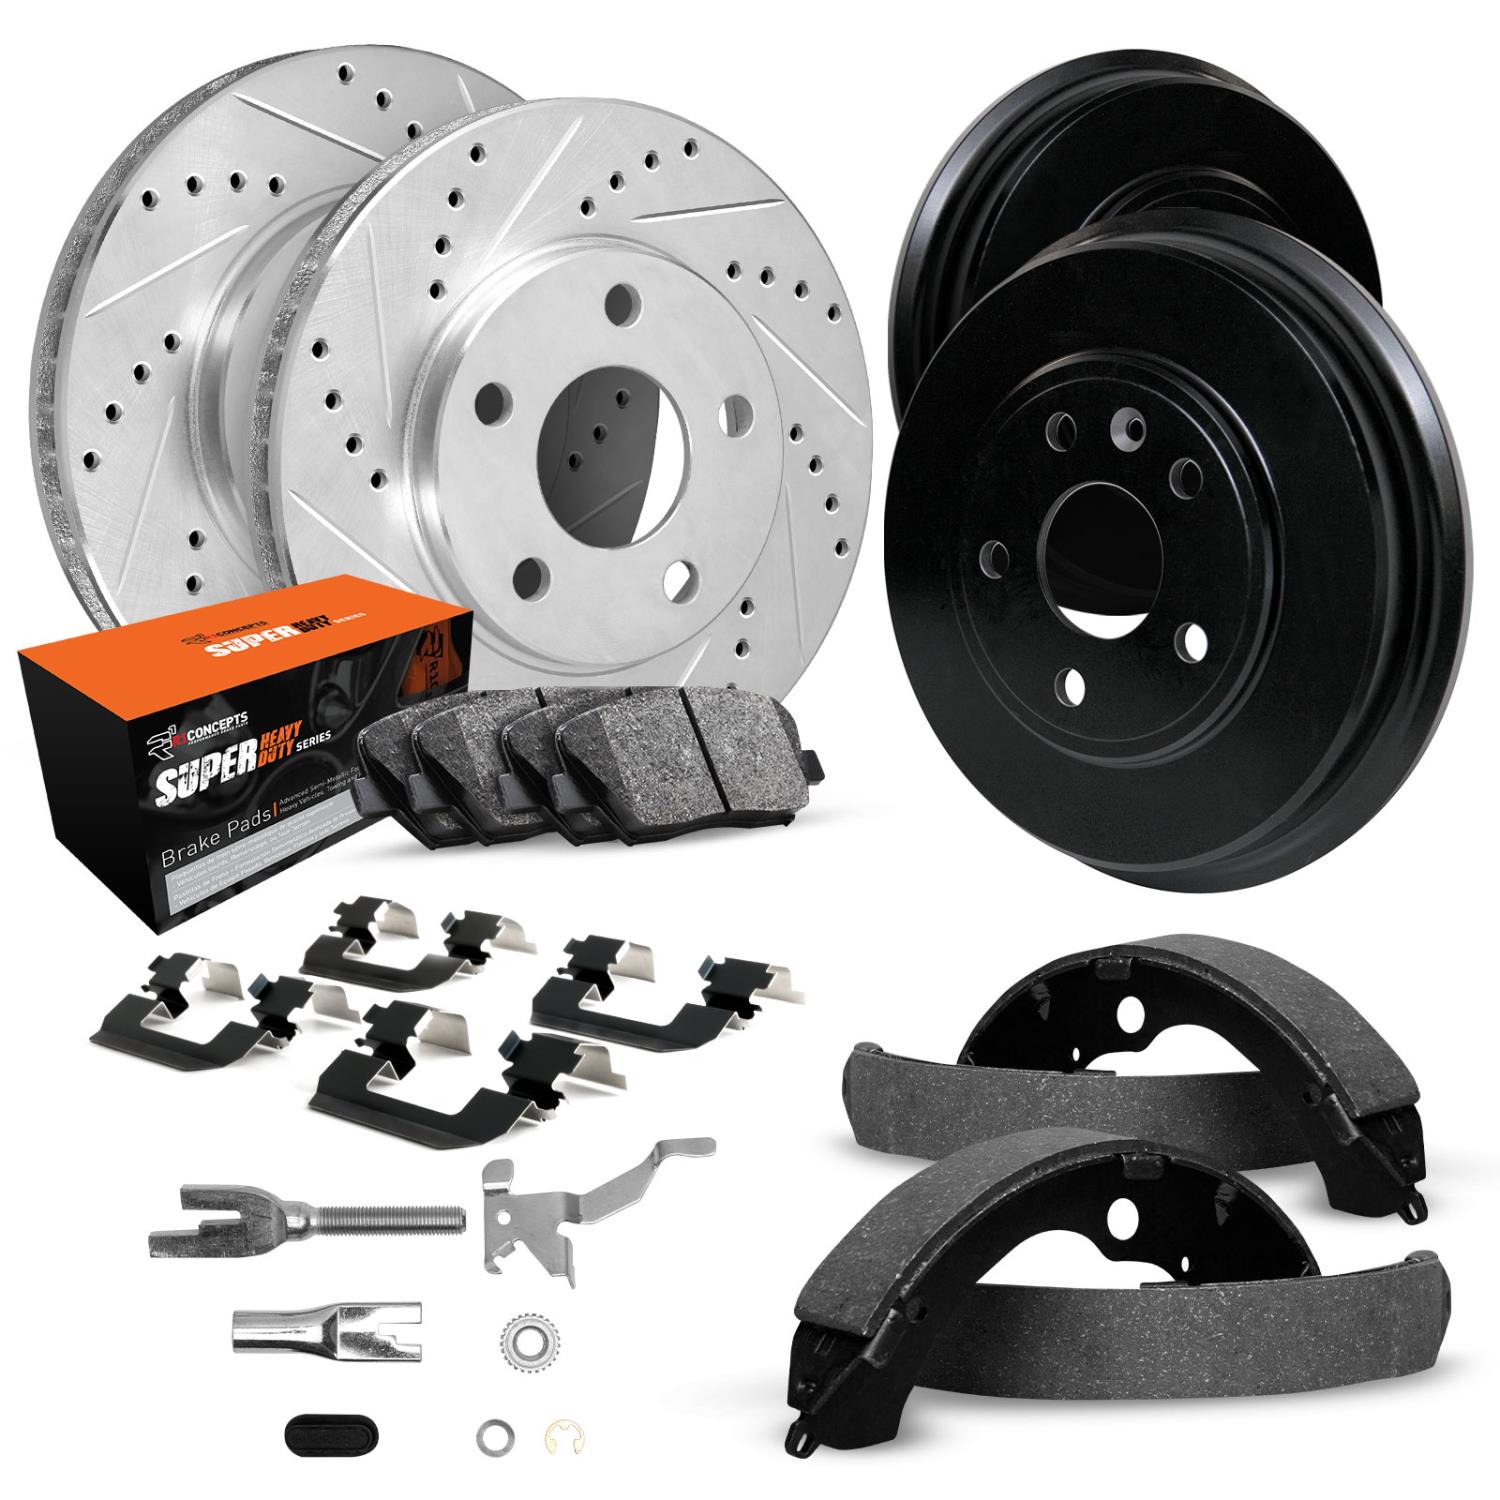 E-Line Drilled/Slotted Silver Rotor & Drum Set w/Super-Duty Pads, Shoes/Hardware/Adjusters, 1980-1980 Ford/Lincoln/Mercury/Mazda